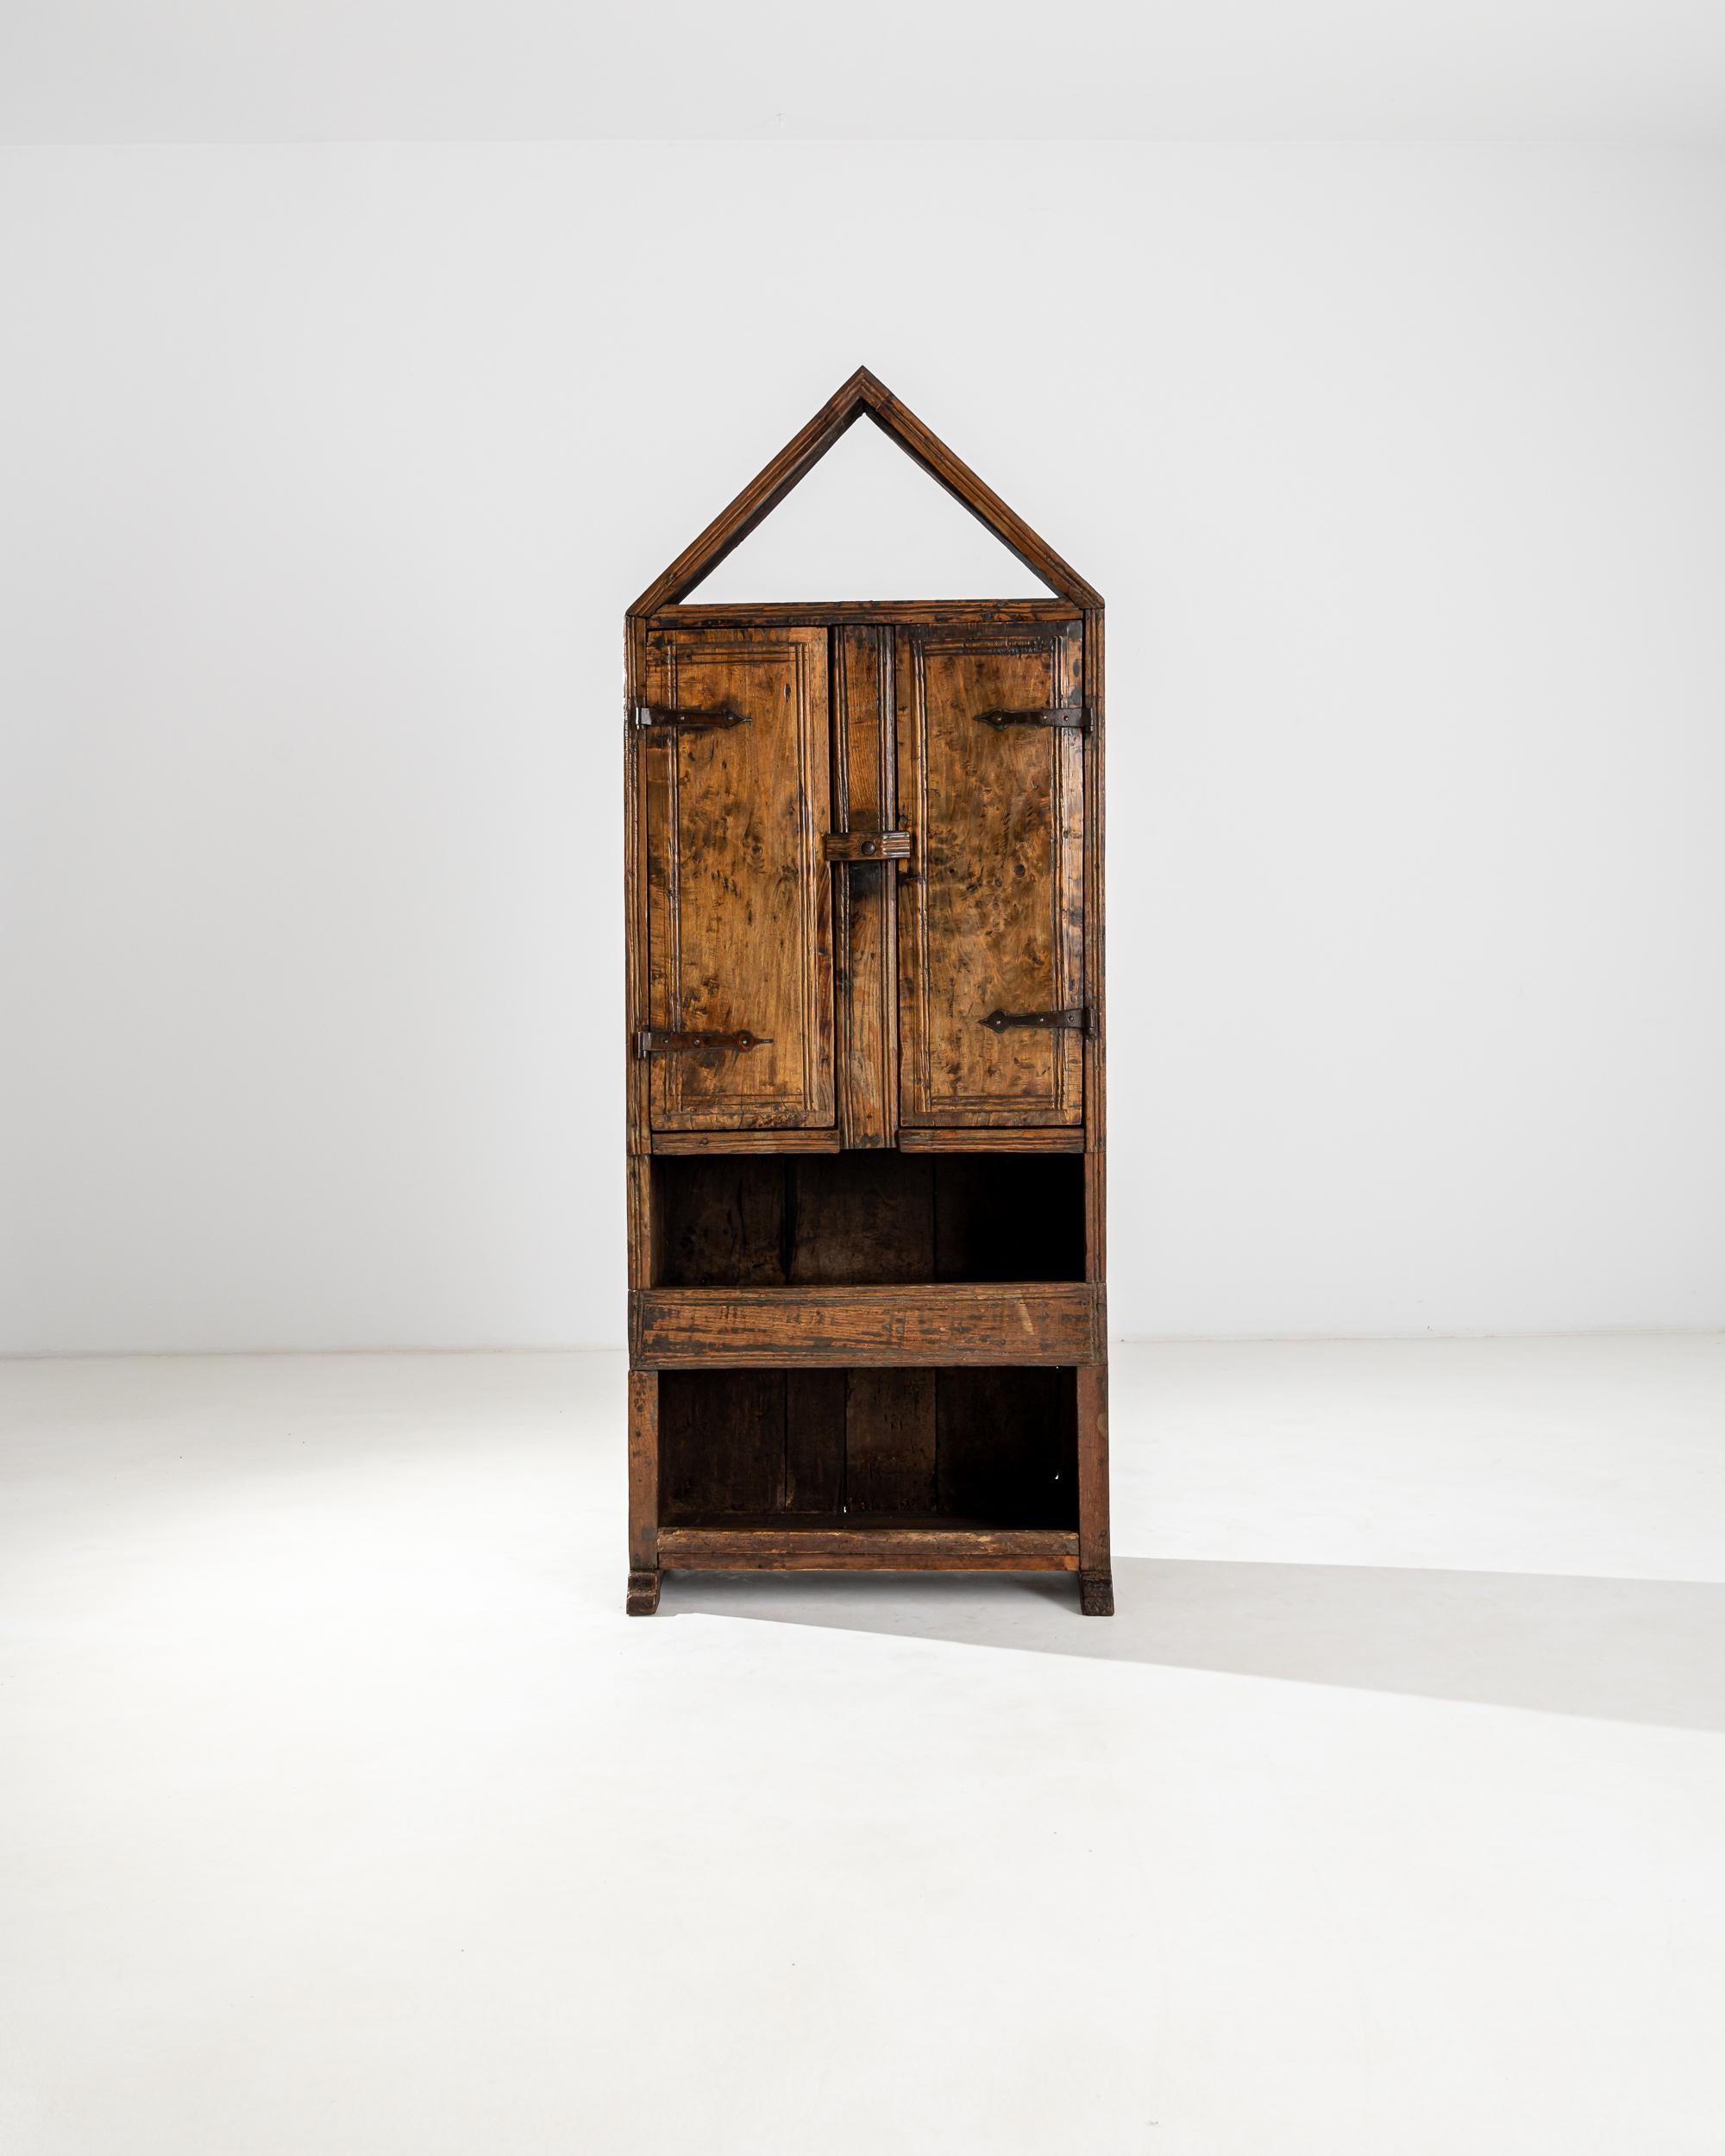 An impressive triangle tops off this 18th century cabinet made in Spain. The construction gives an architectural feel, the gable playfully interacts with the hollow drawers of the lower section elevated on the bracket feet. The upper compartment